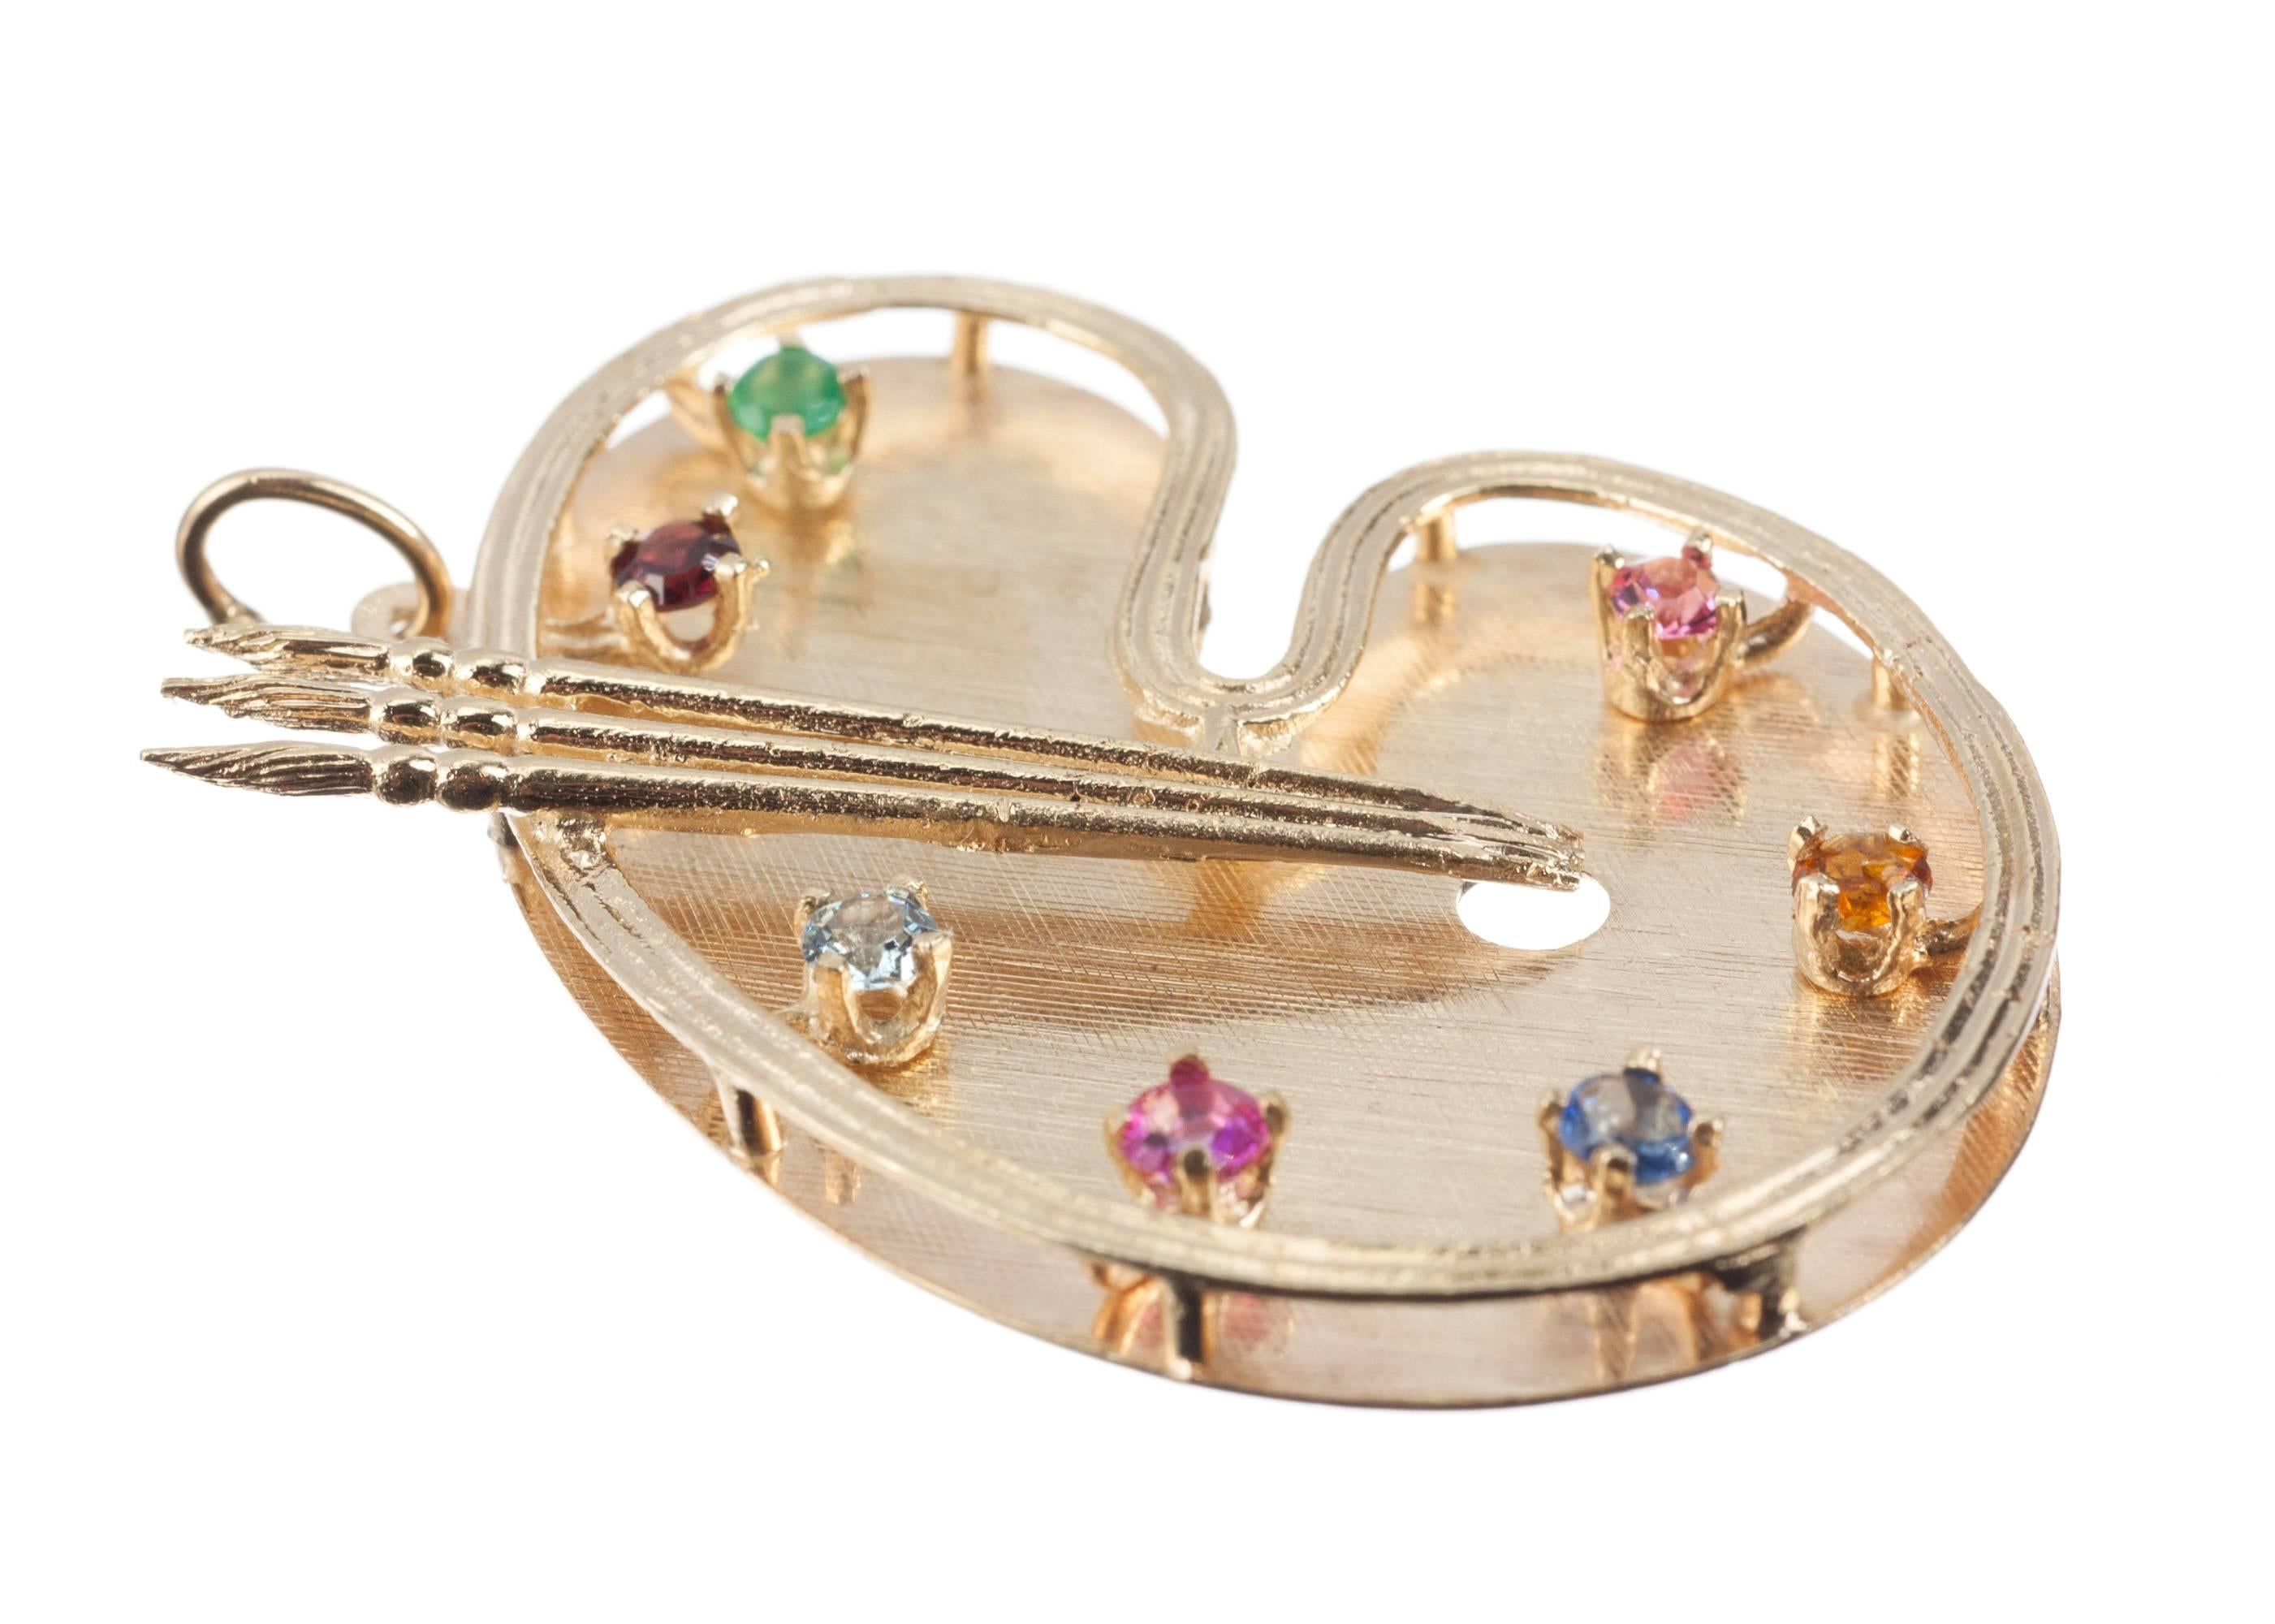 This magnificent, large 14-karat yellow gold charm resembling an artist’s palette is set with a collection of small colored gemstones, approx. 3.2mm each, including emerald, garnet, aquamarine, ruby, sapphire, citrine and pink tourmaline. Measuring